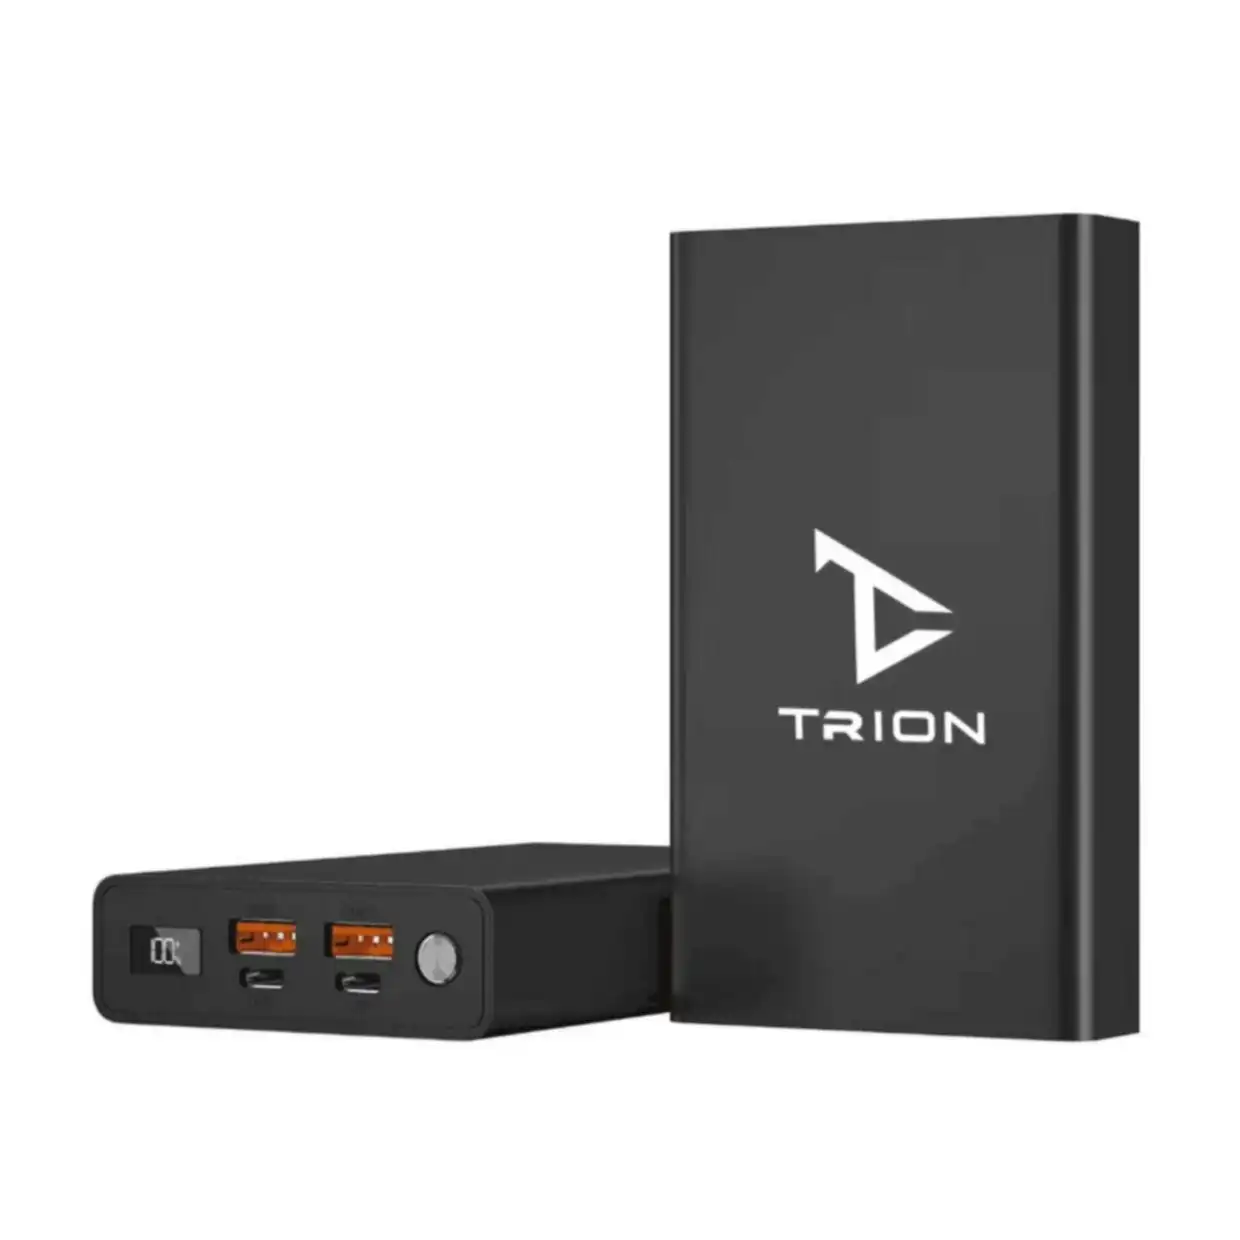 Trion 100W IS-LP02 20000mAh Power Bank With Digital Display, Dual USB & Type C Connectivity